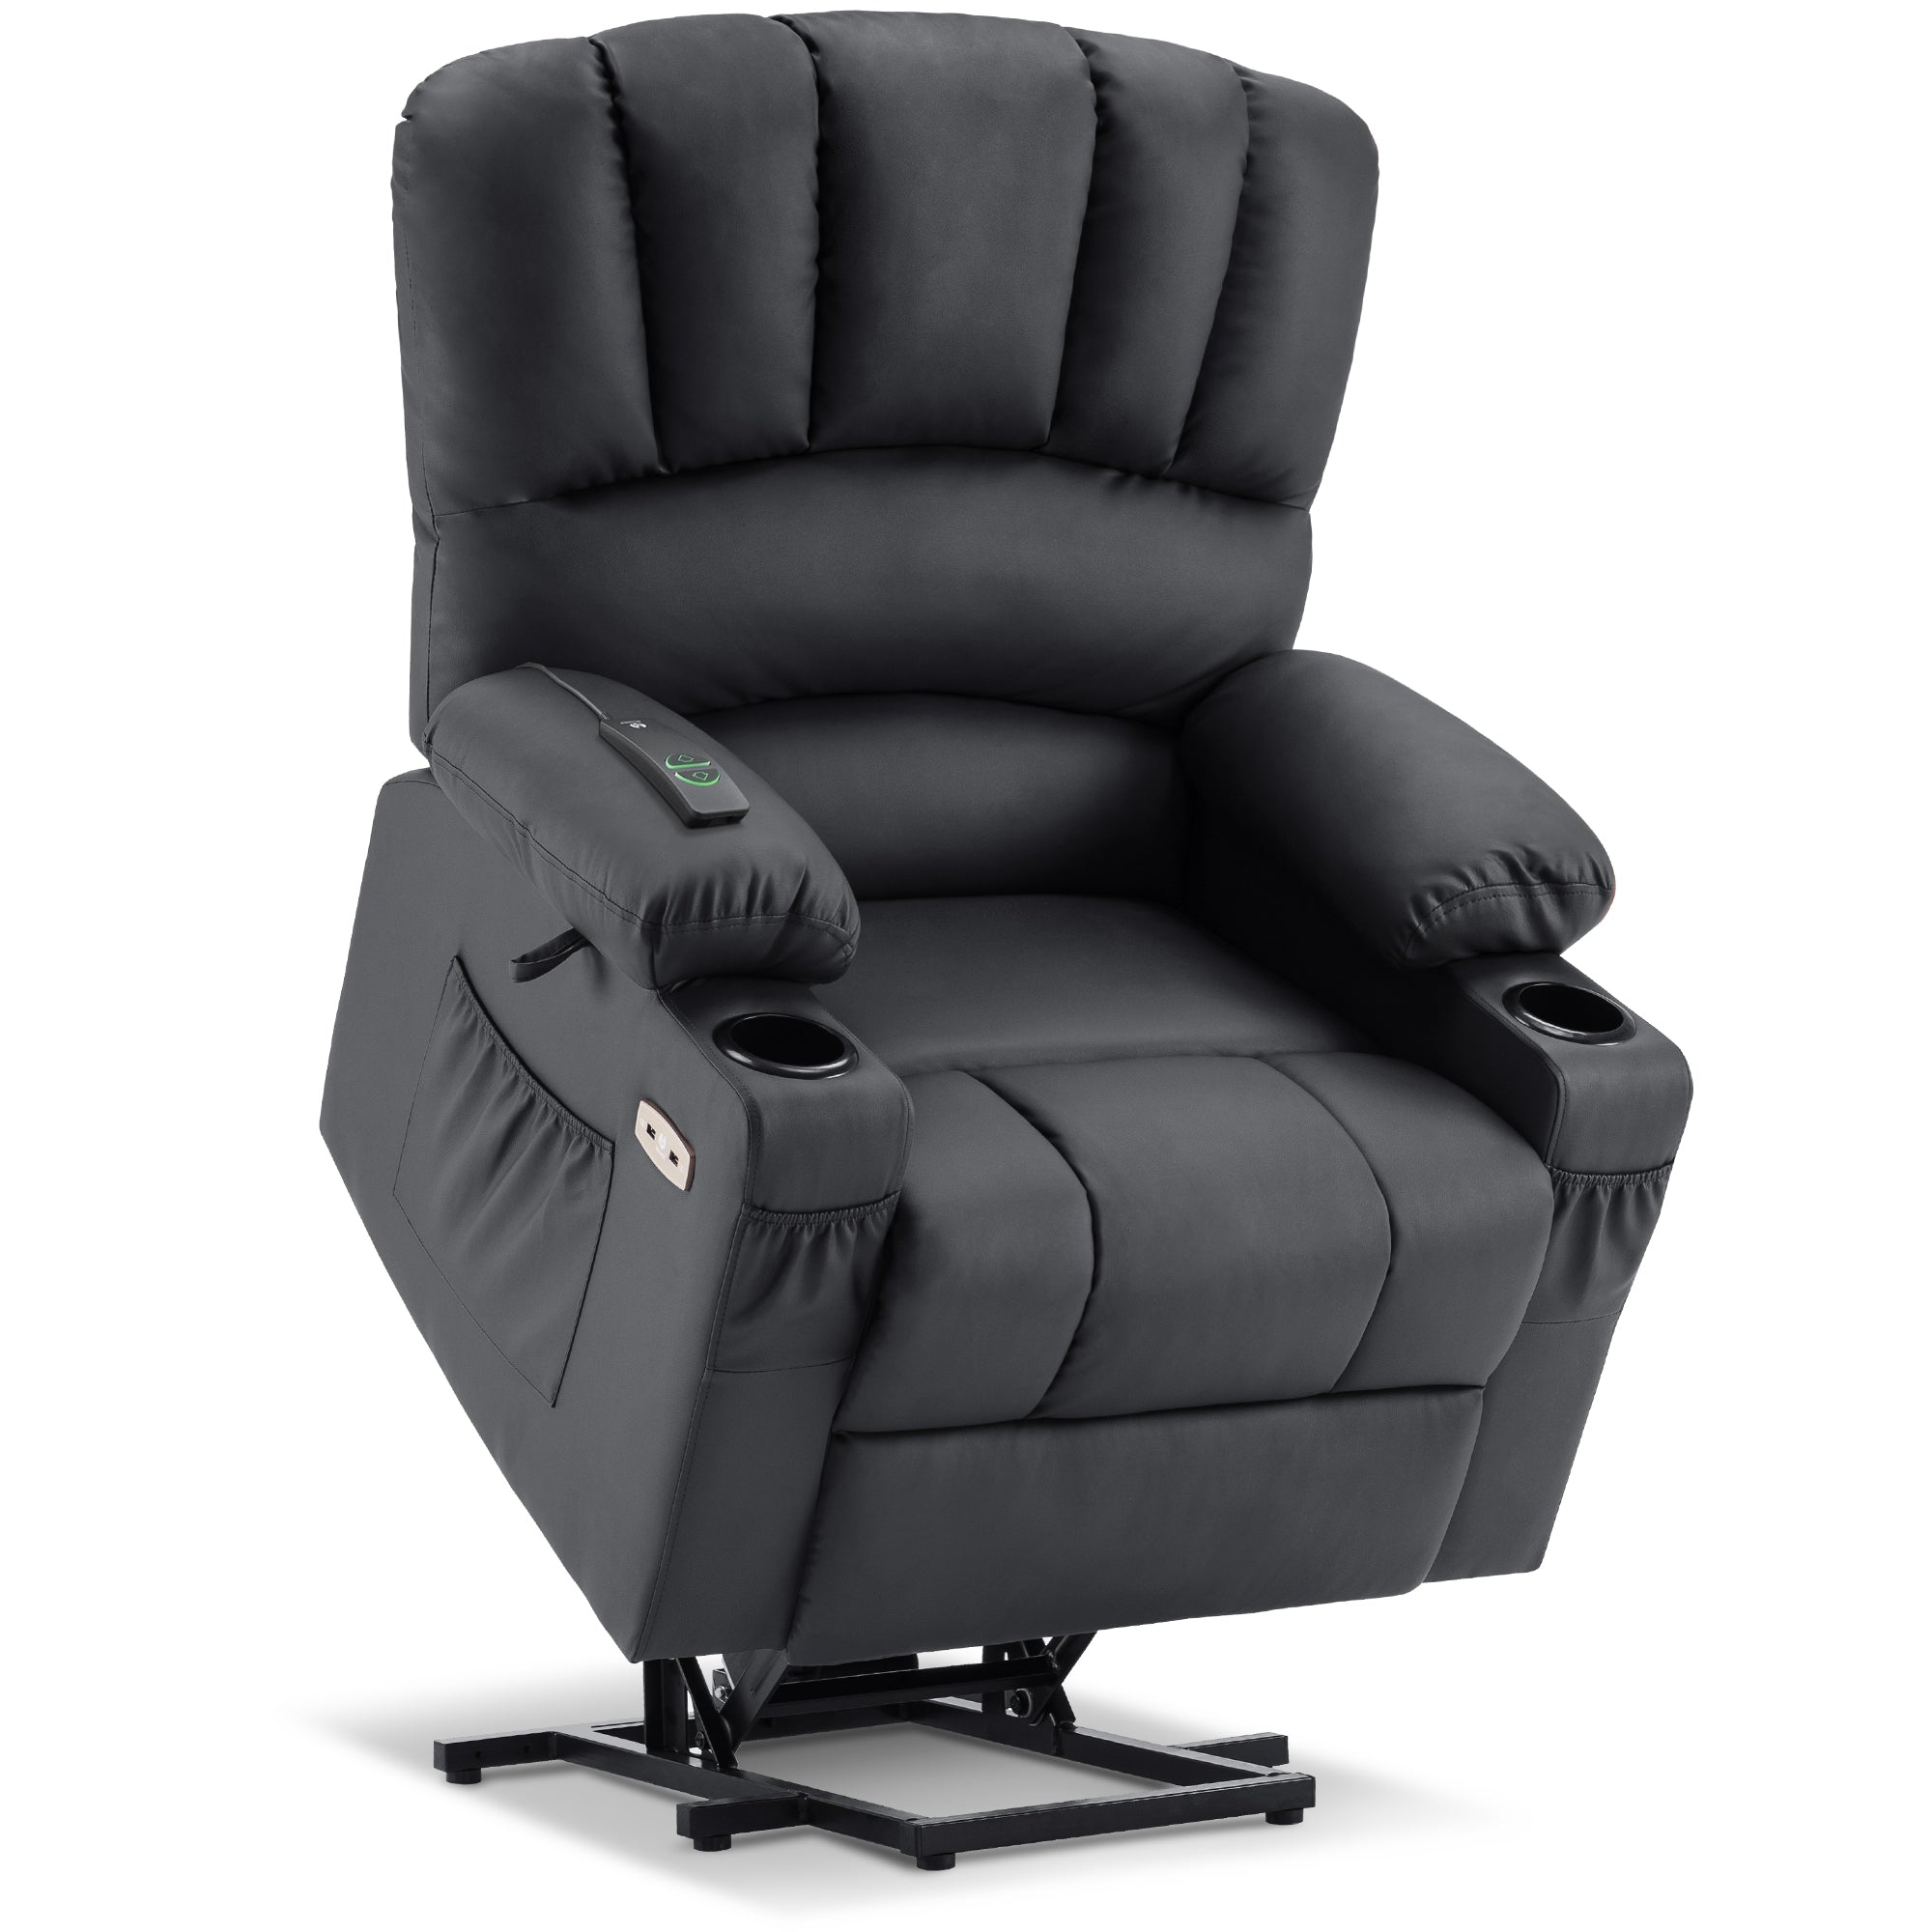 MCombo Power Lift Recliner Chair Sofa with Massage and Heat for Elderly People, Cup Holders, USB Ports, Side Pockets, Faux Leather 7095 Series